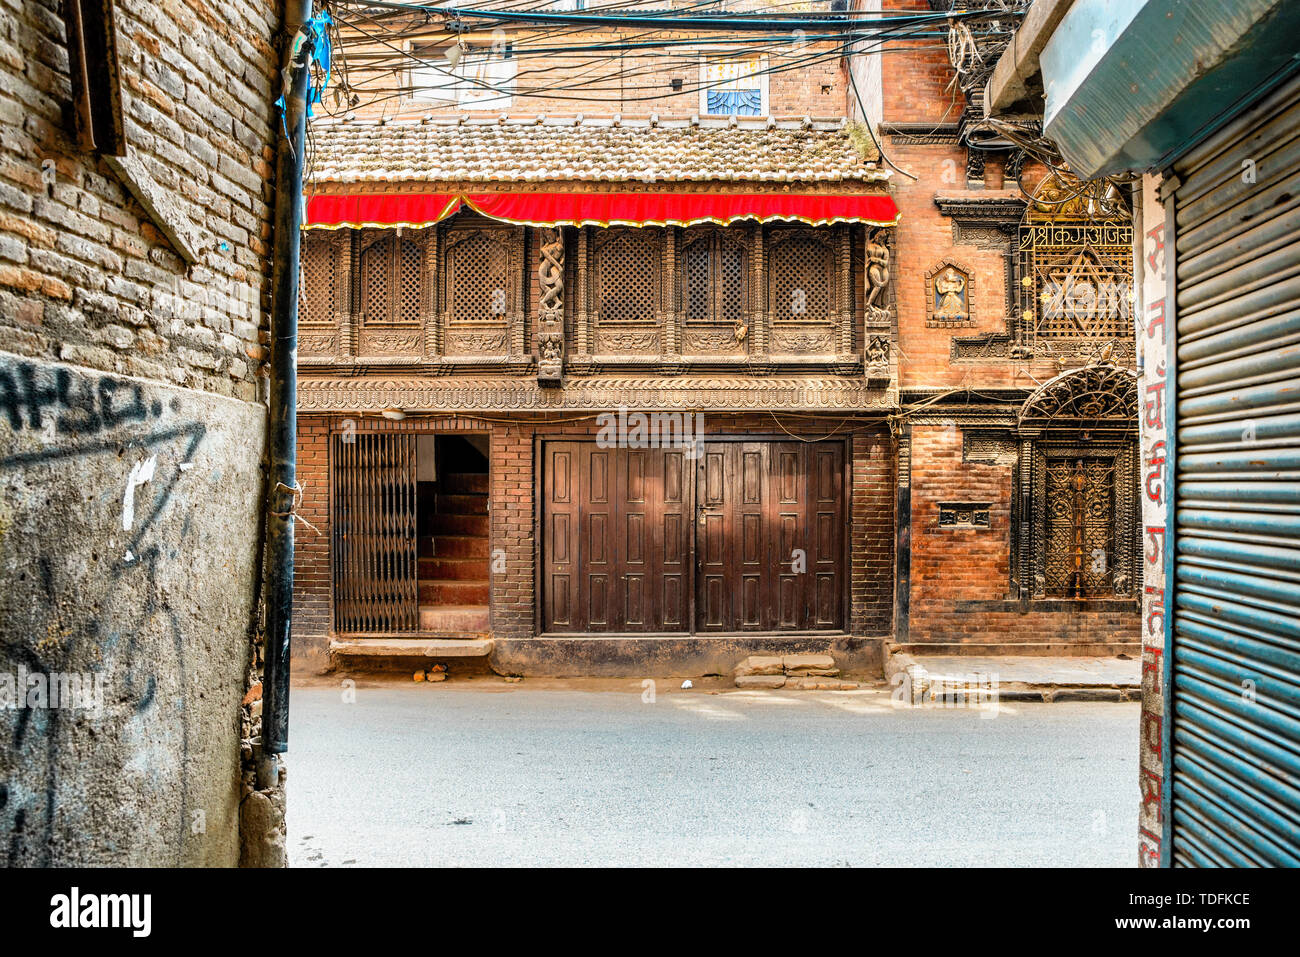 View at the decorative wood carving at the old house facade in Thamel, Kathmandu, Nepal. Stock Photo